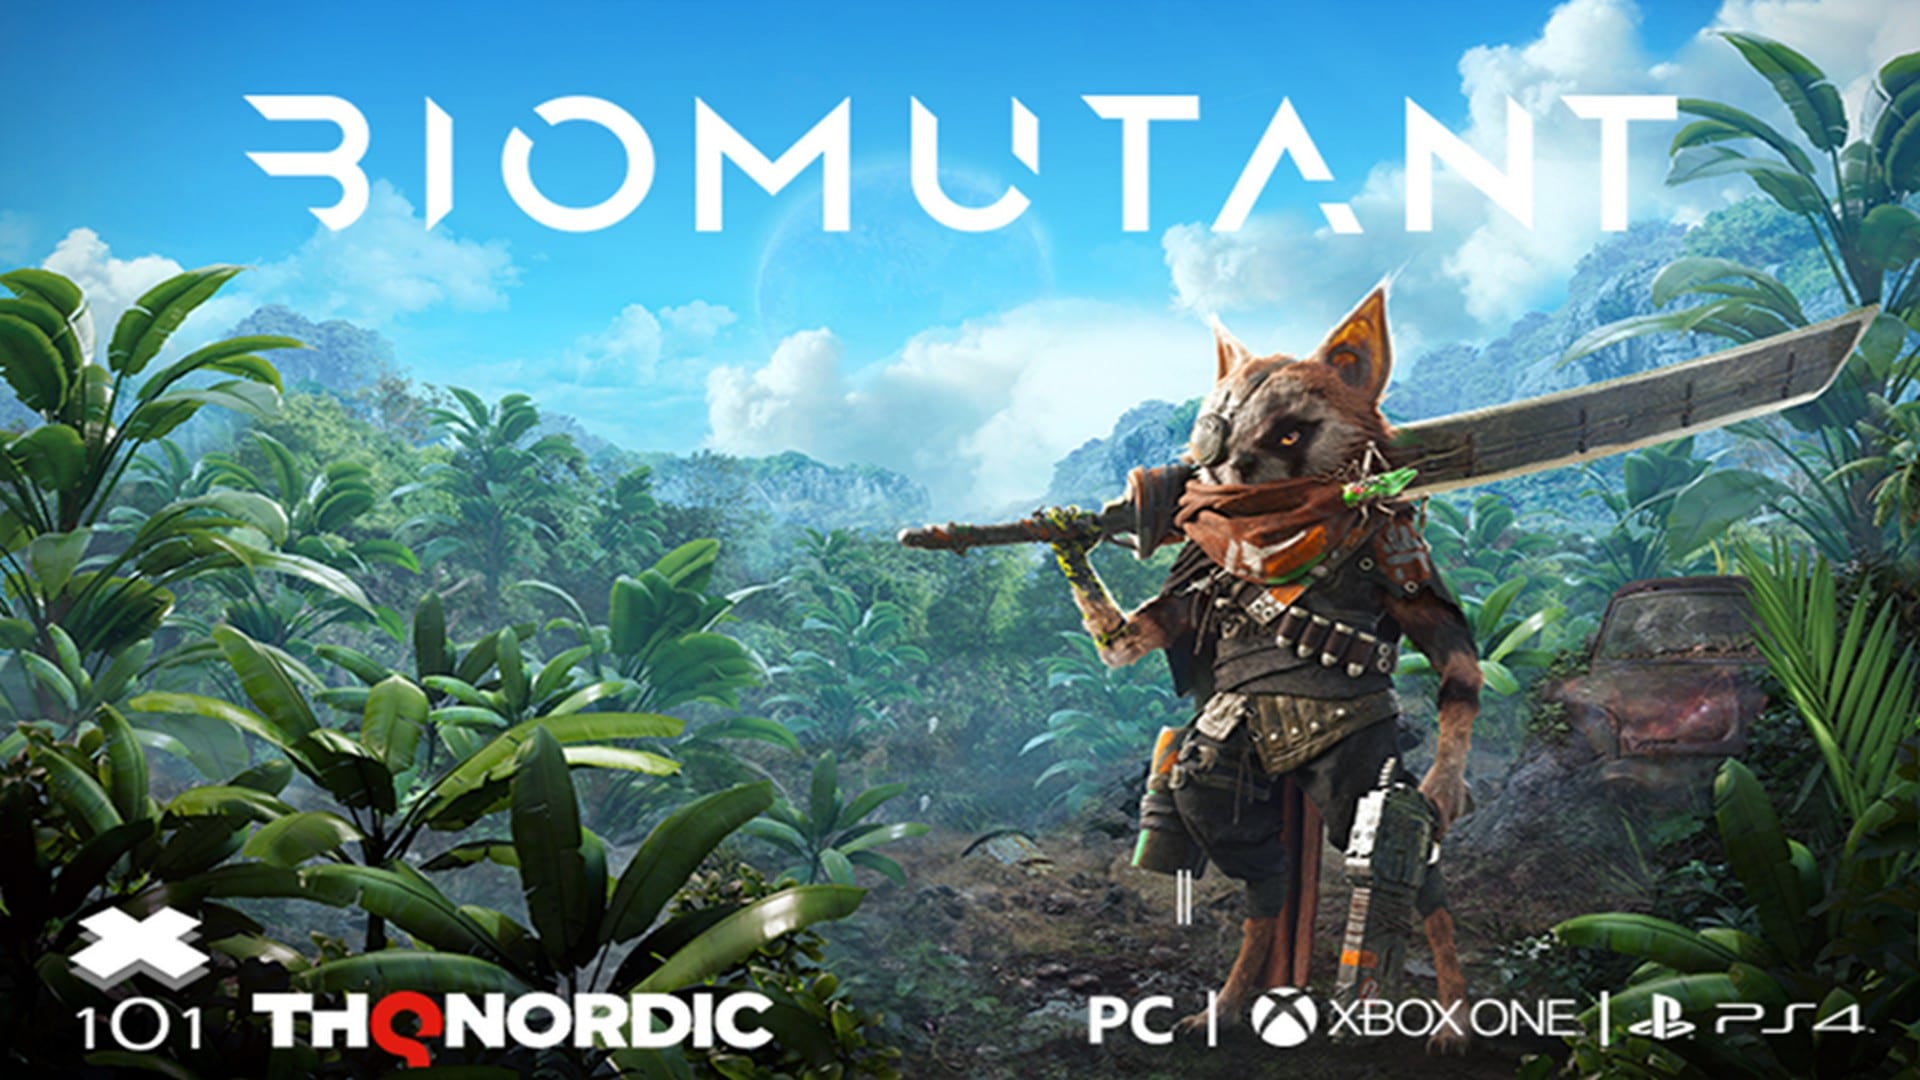 New Gameplay Trailer For Biomutant Shows Over 9 Minutes Of The Hero’s Journey